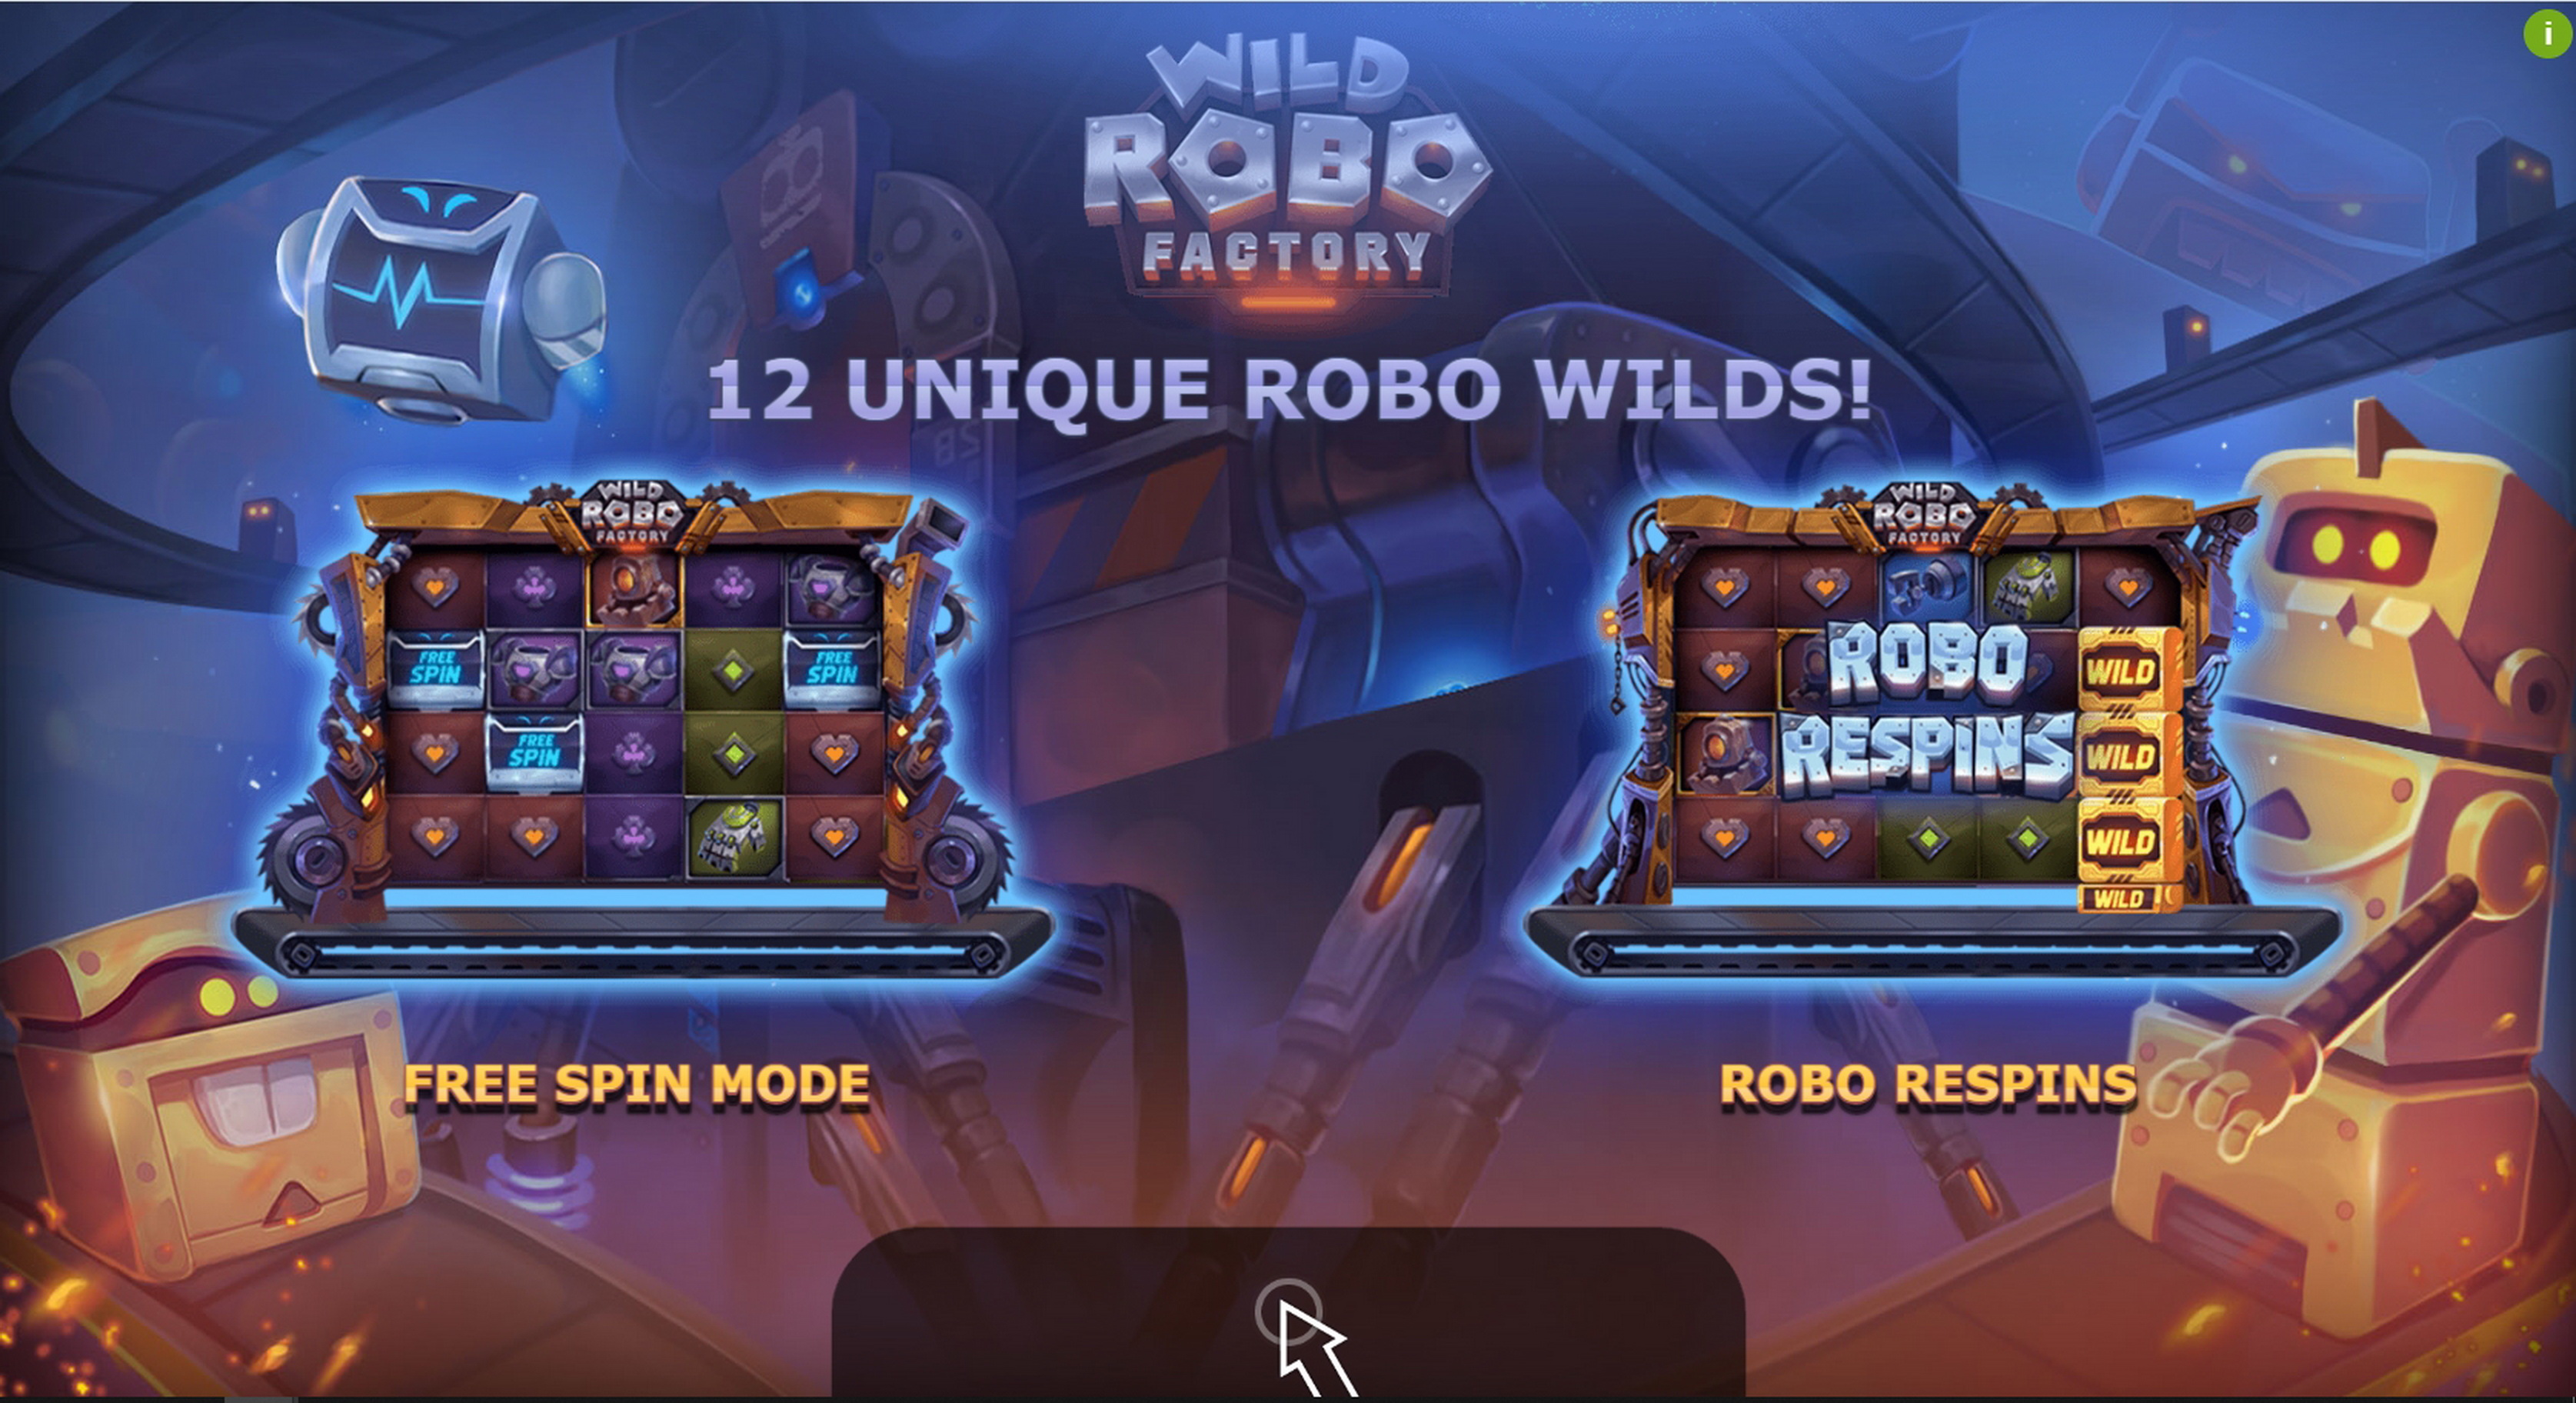 Play Wild Robo Factory Free Casino Slot Game by Yggdrasil Gaming